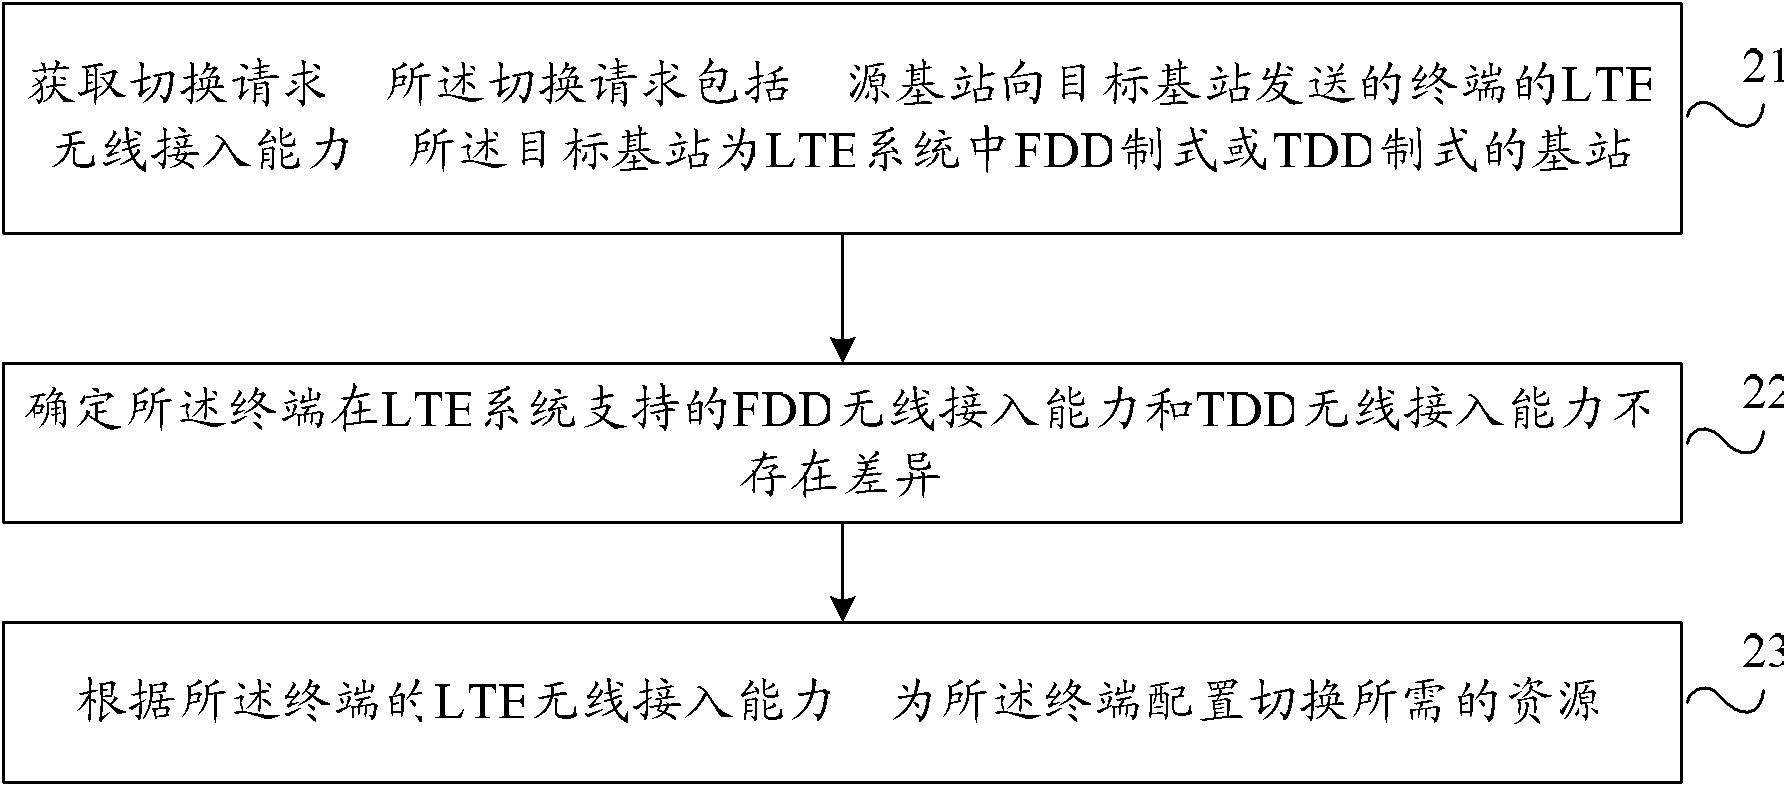 Terminal wireless access capability reporting and switching resource allocation method, device and system